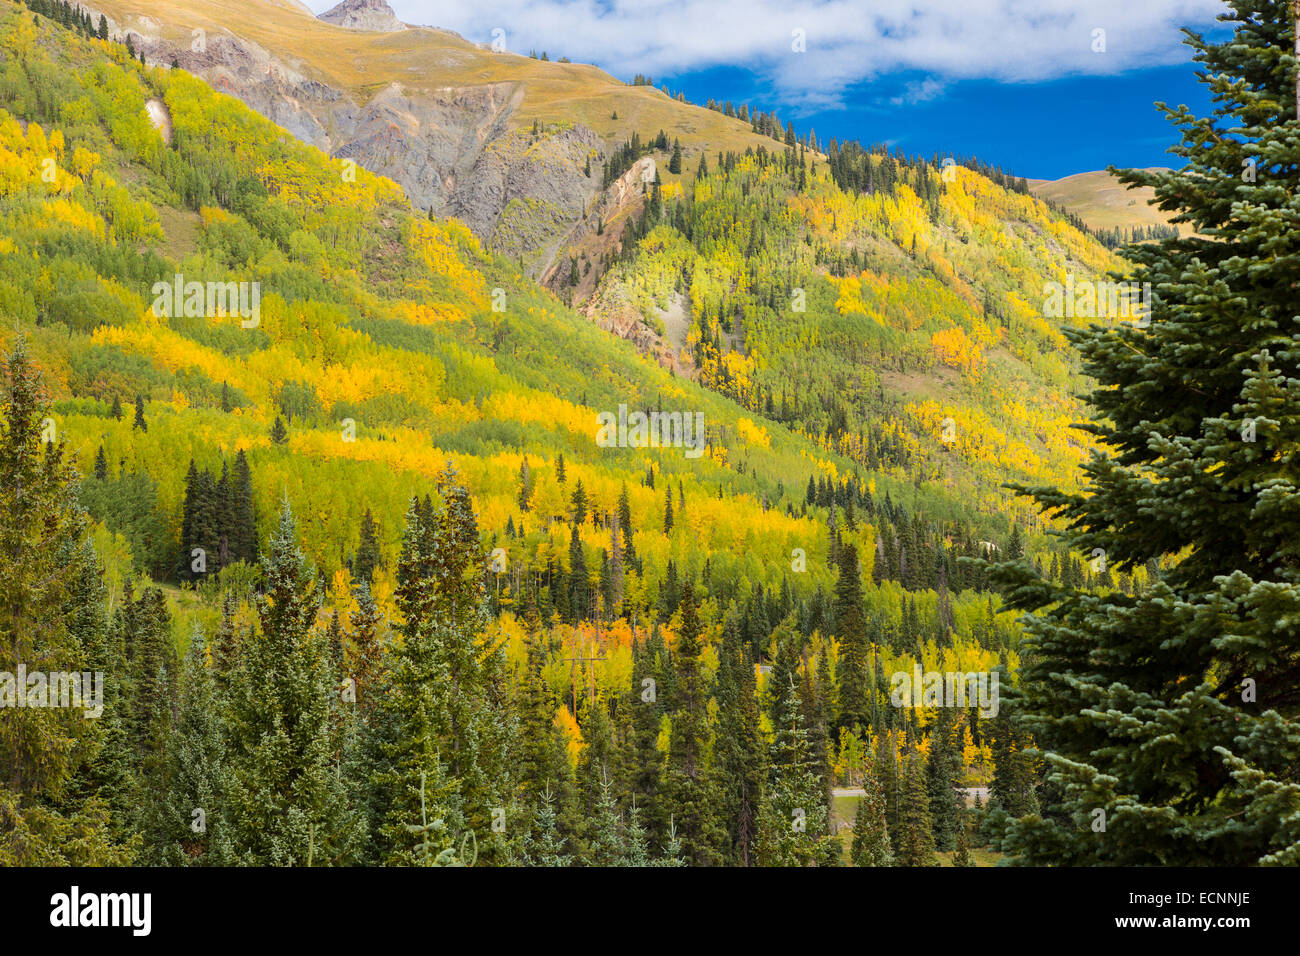 Fall in the Rocky Mountains along Route 550, The Million Dollar Highway in the Ouray, Silverton area of Colorado Stock Photo